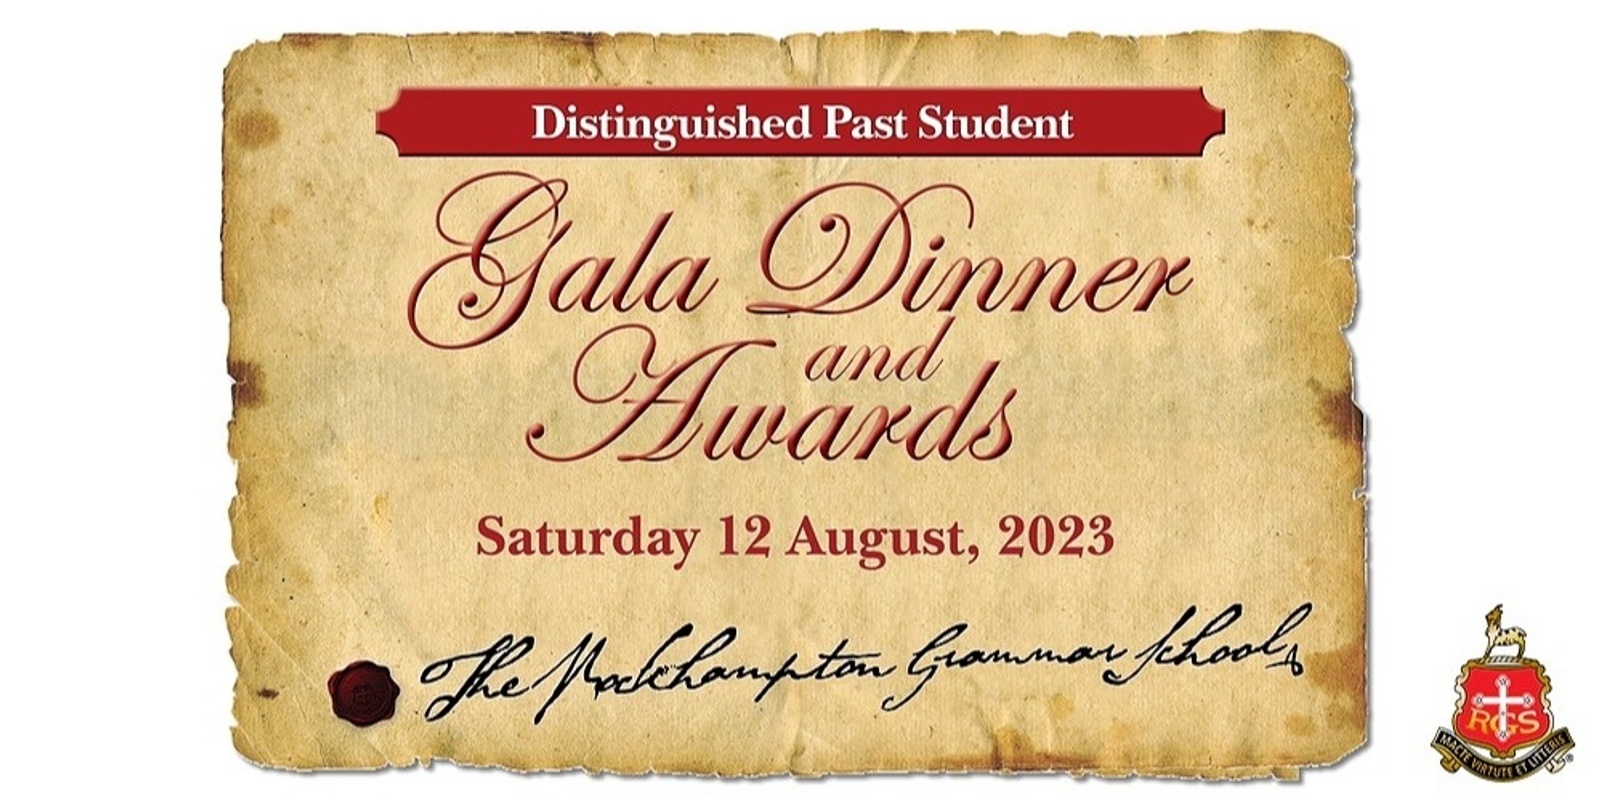 Banner image for 2023 RGS Distinguished Past Students' Awards